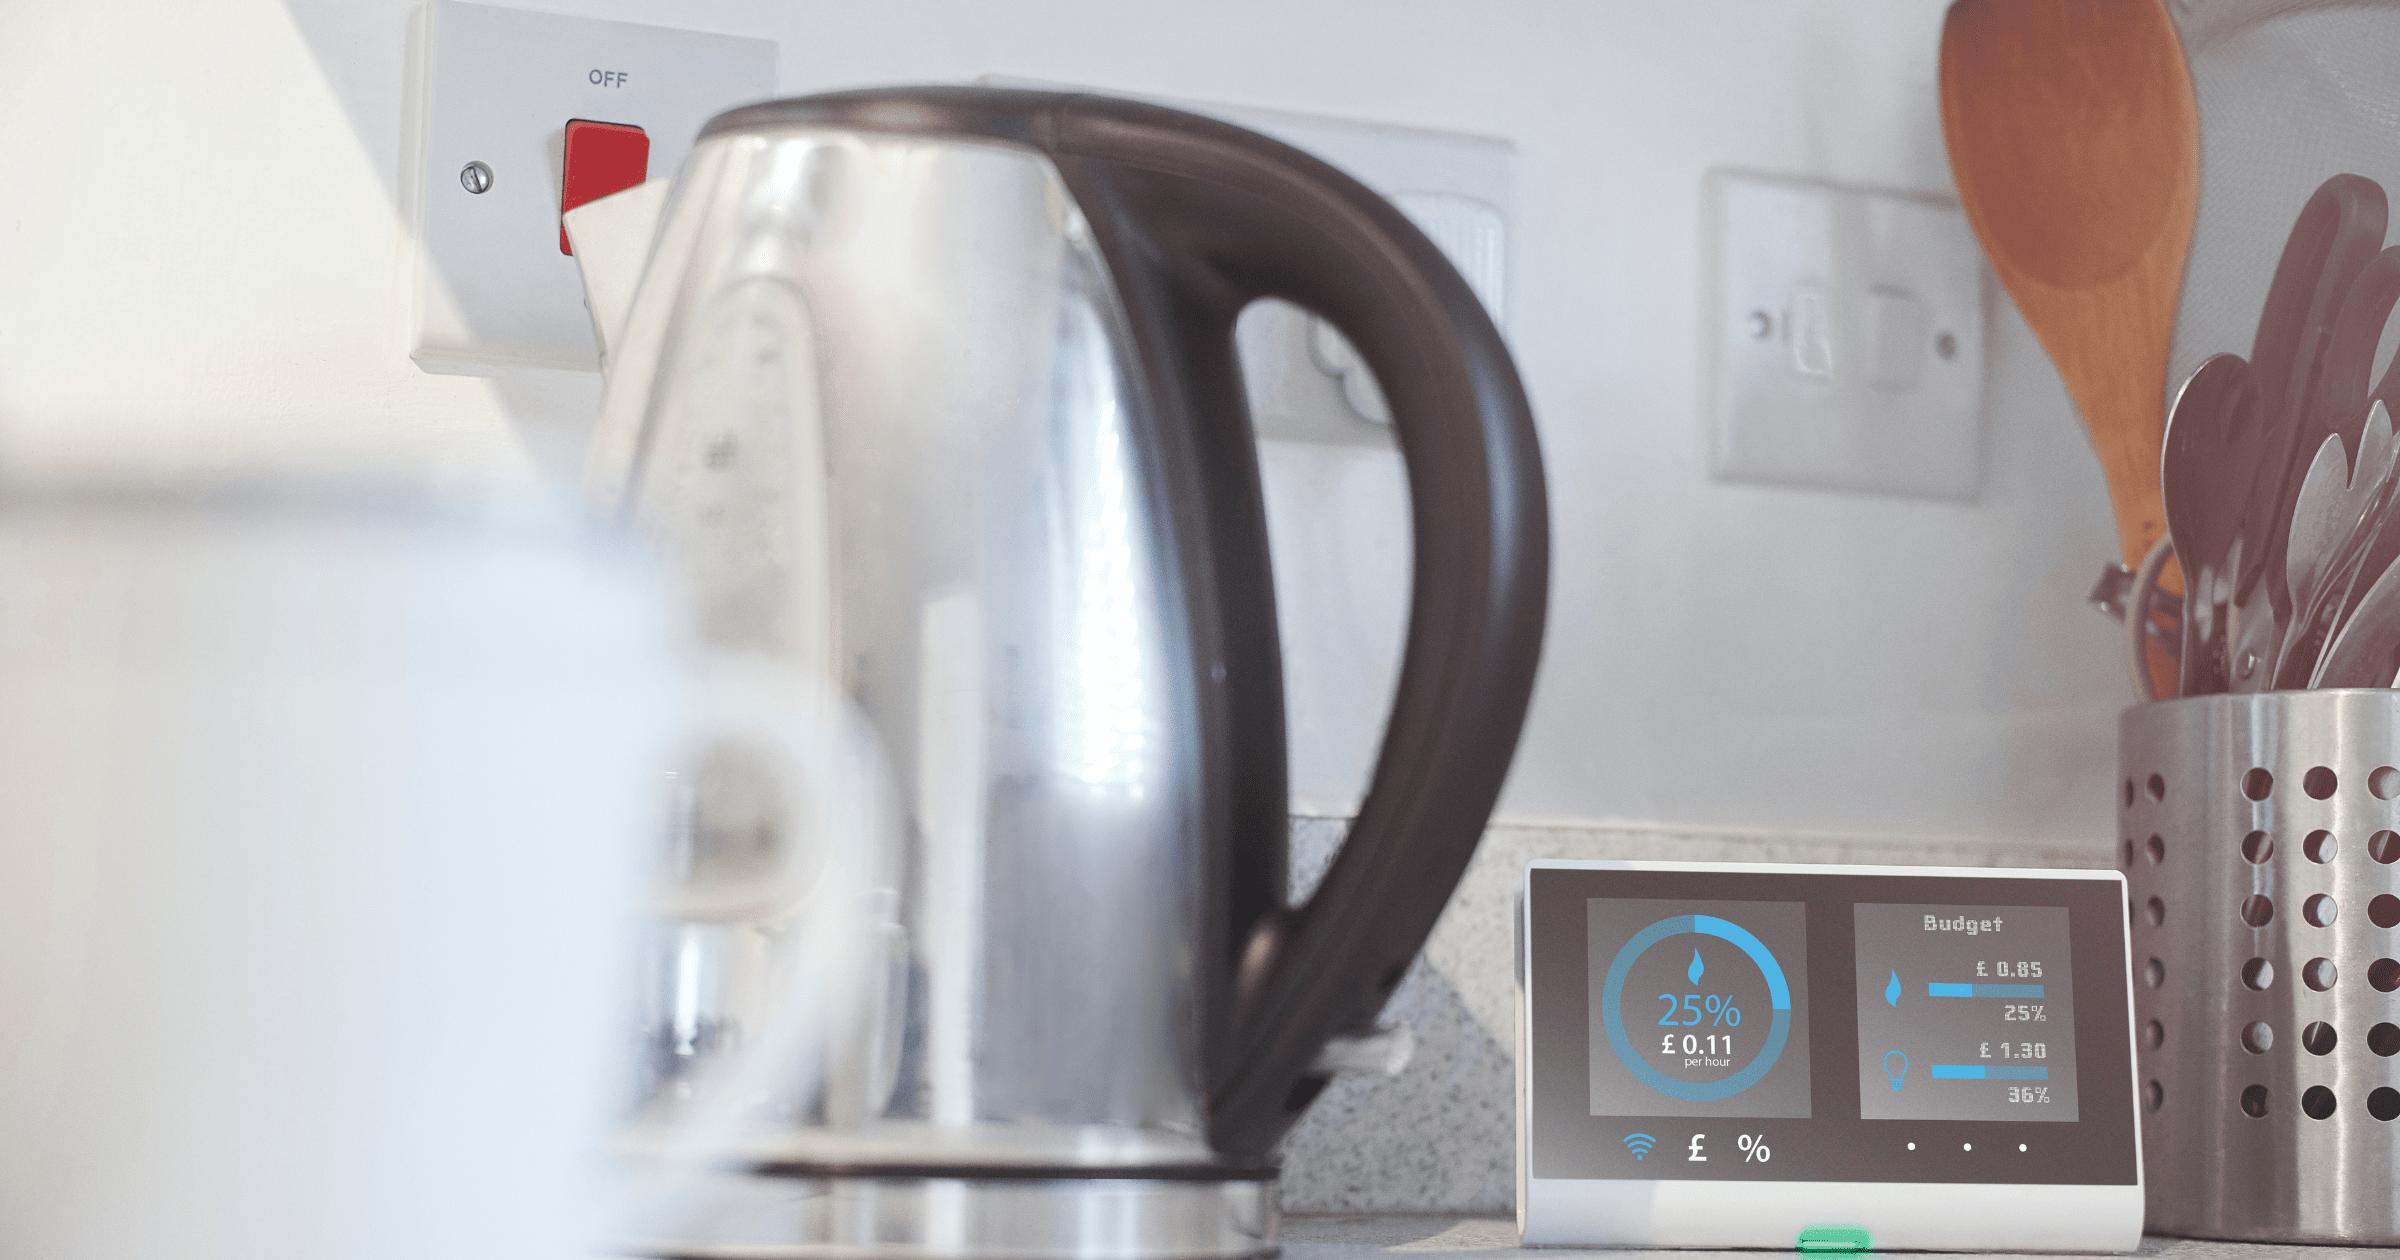 A stock image of a smart meter and kettle - start your property search on Share to Buy! 